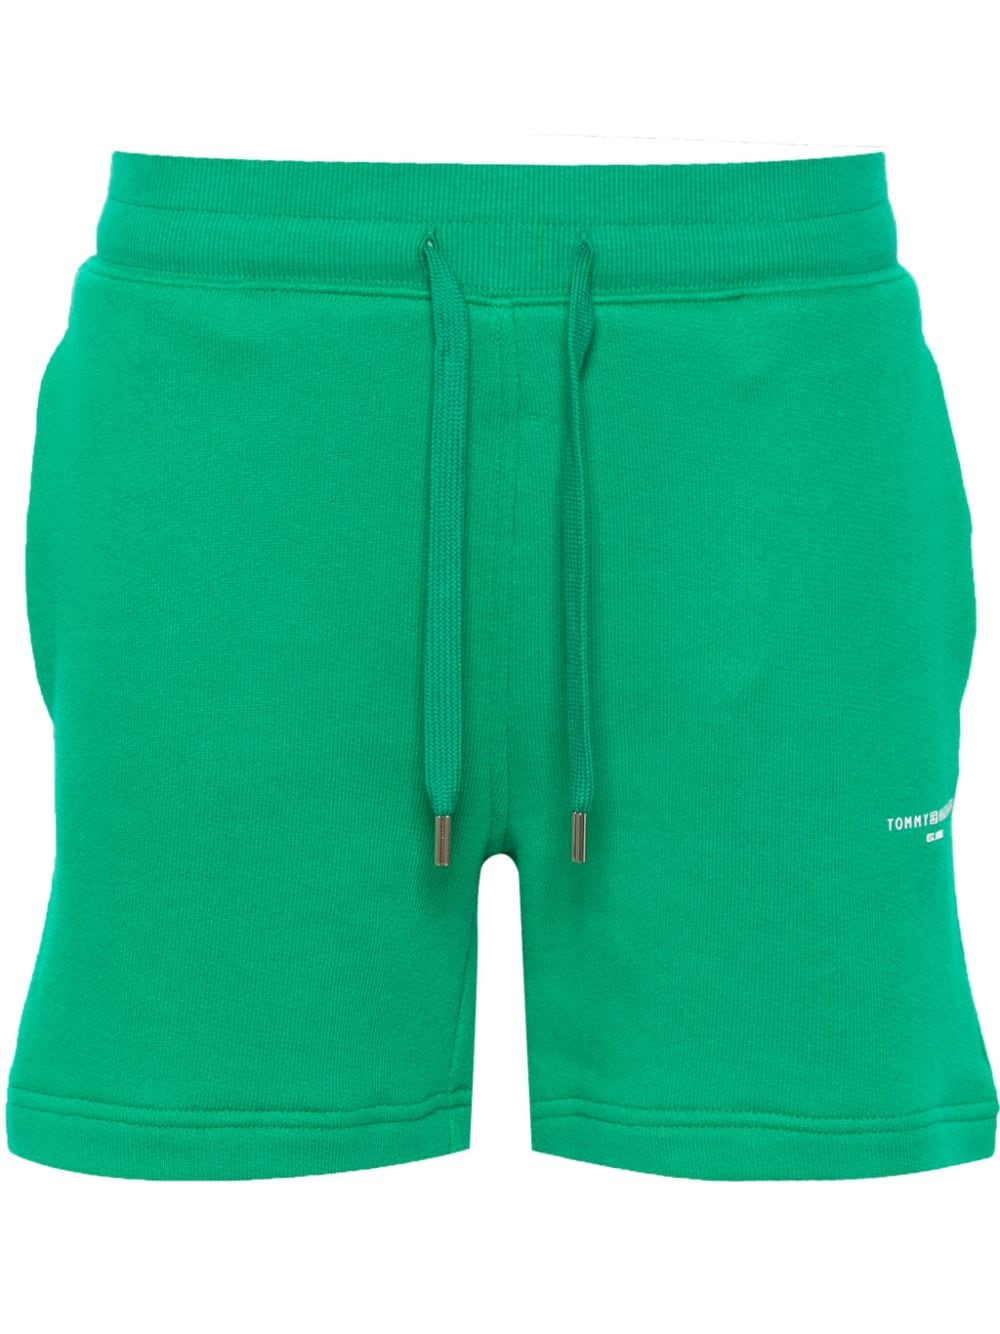 Tommy Hilfiger 1985 Signature Track Shorts In Green